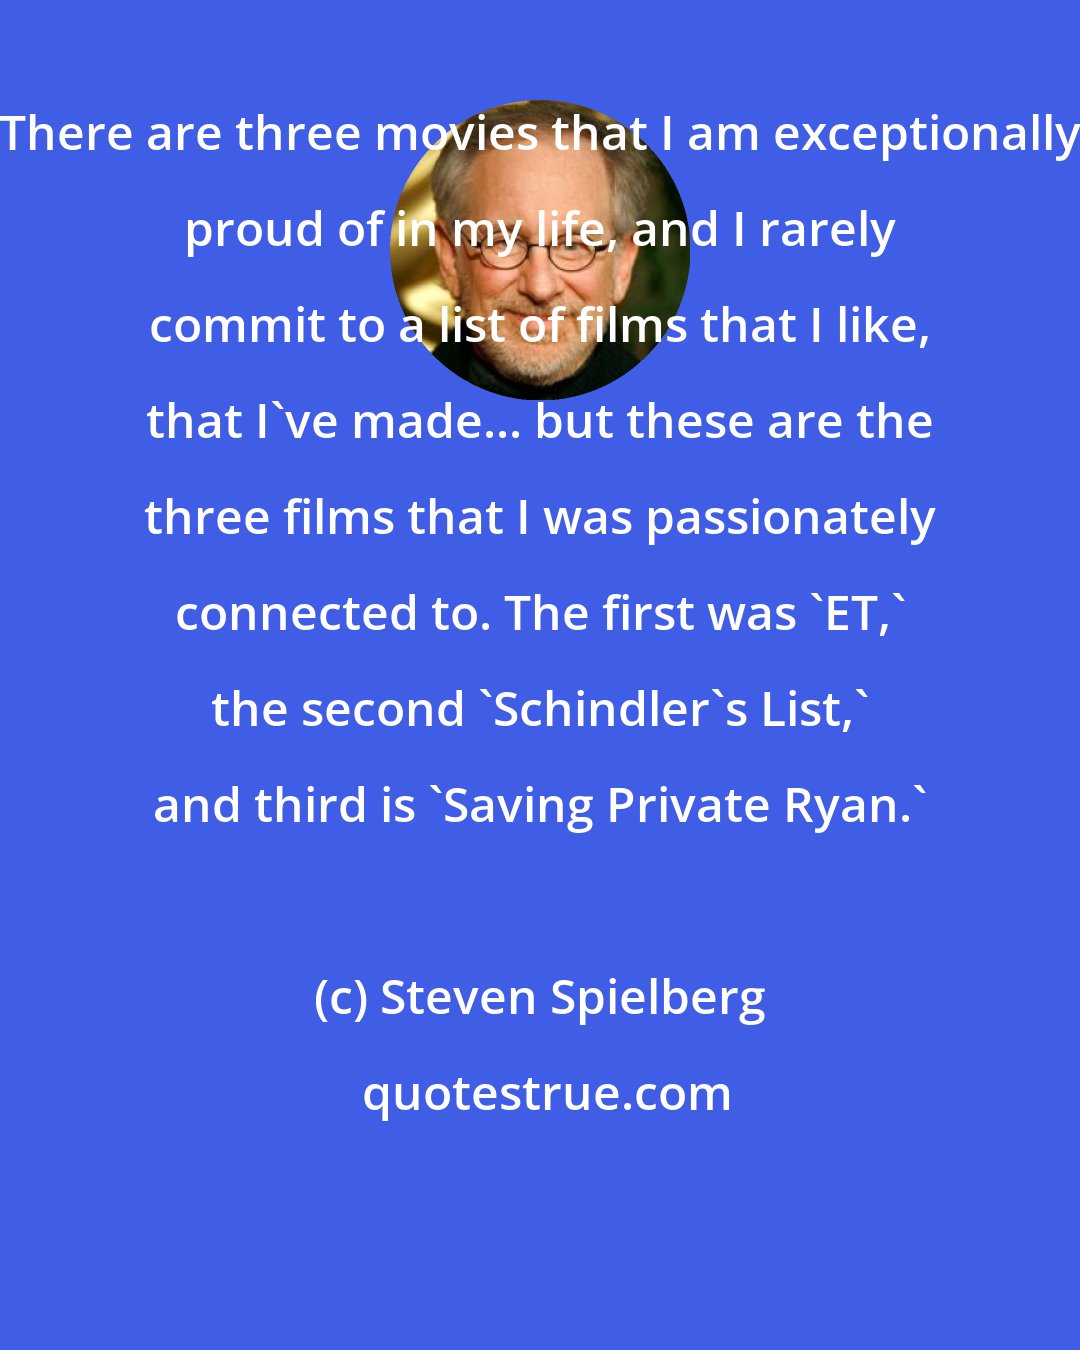 Steven Spielberg: There are three movies that I am exceptionally proud of in my life, and I rarely commit to a list of films that I like, that I've made... but these are the three films that I was passionately connected to. The first was 'ET,' the second 'Schindler's List,' and third is 'Saving Private Ryan.'